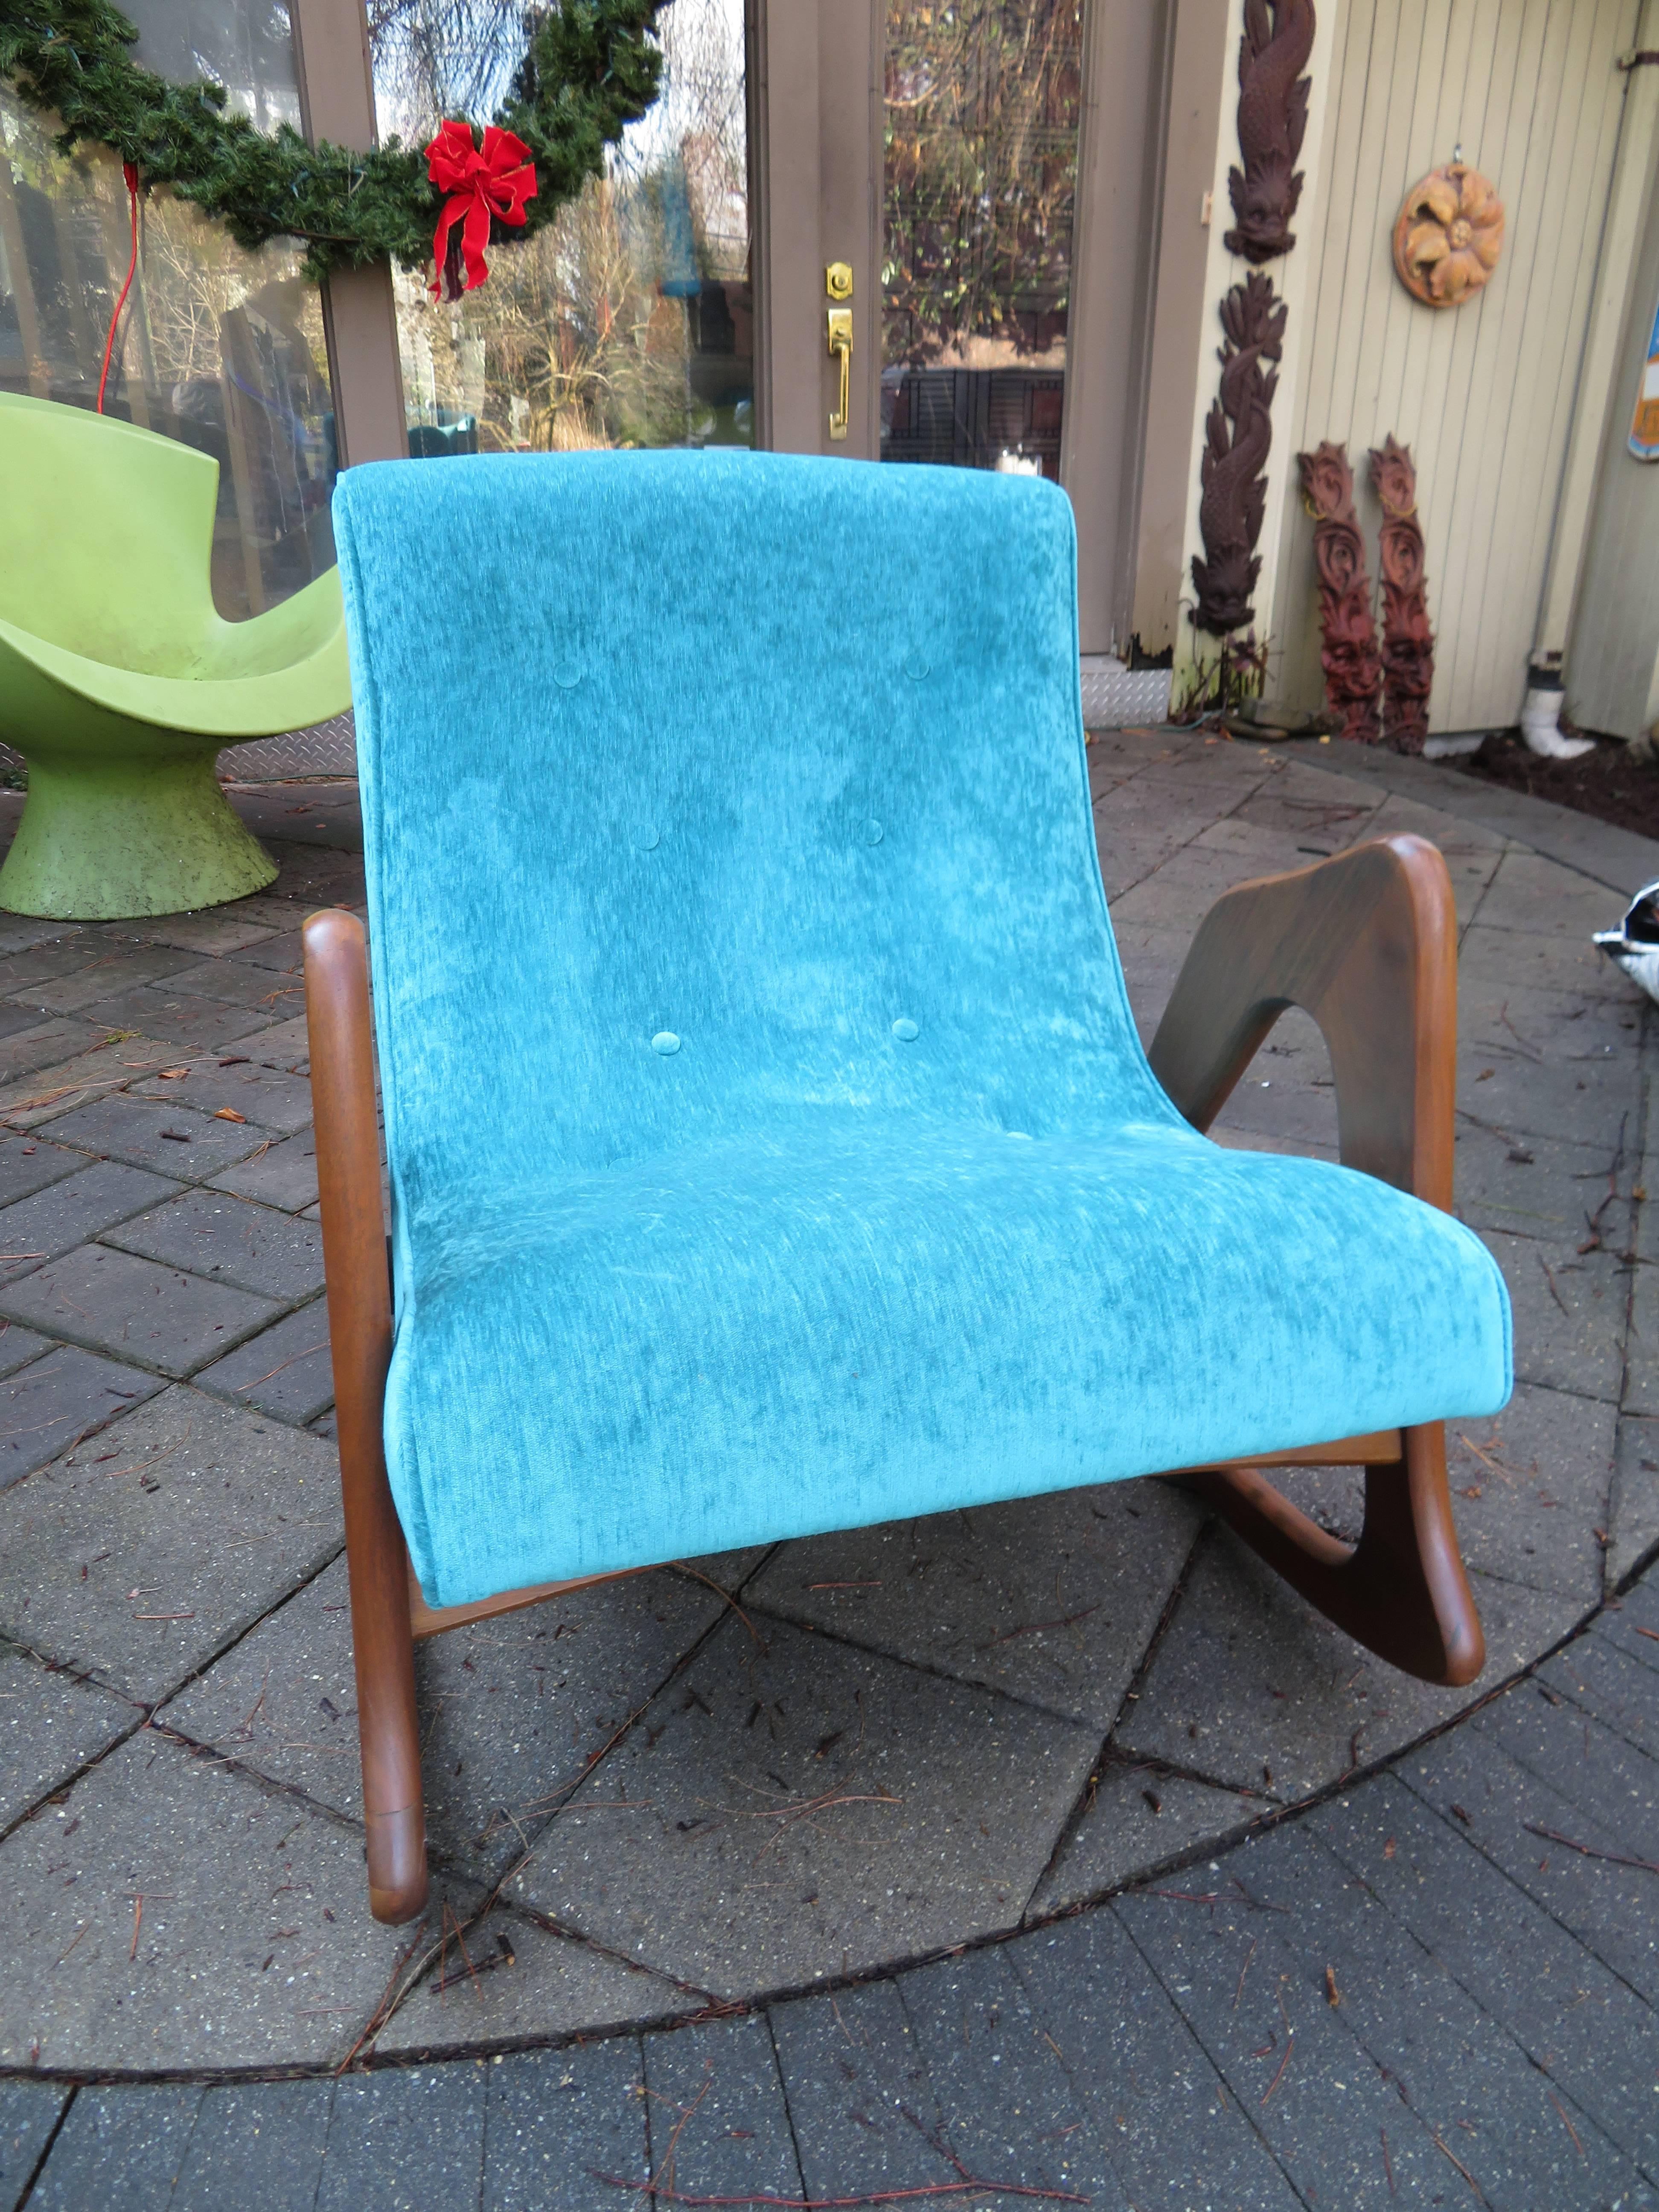 Spectacular Adrian Pearsall walnut rocking chair for Craft Associates. This fabulous sculptural rocker is in great restored condition. The high end woven turquoise upholstery and foam are brand new. The base has been refinished and looks great!